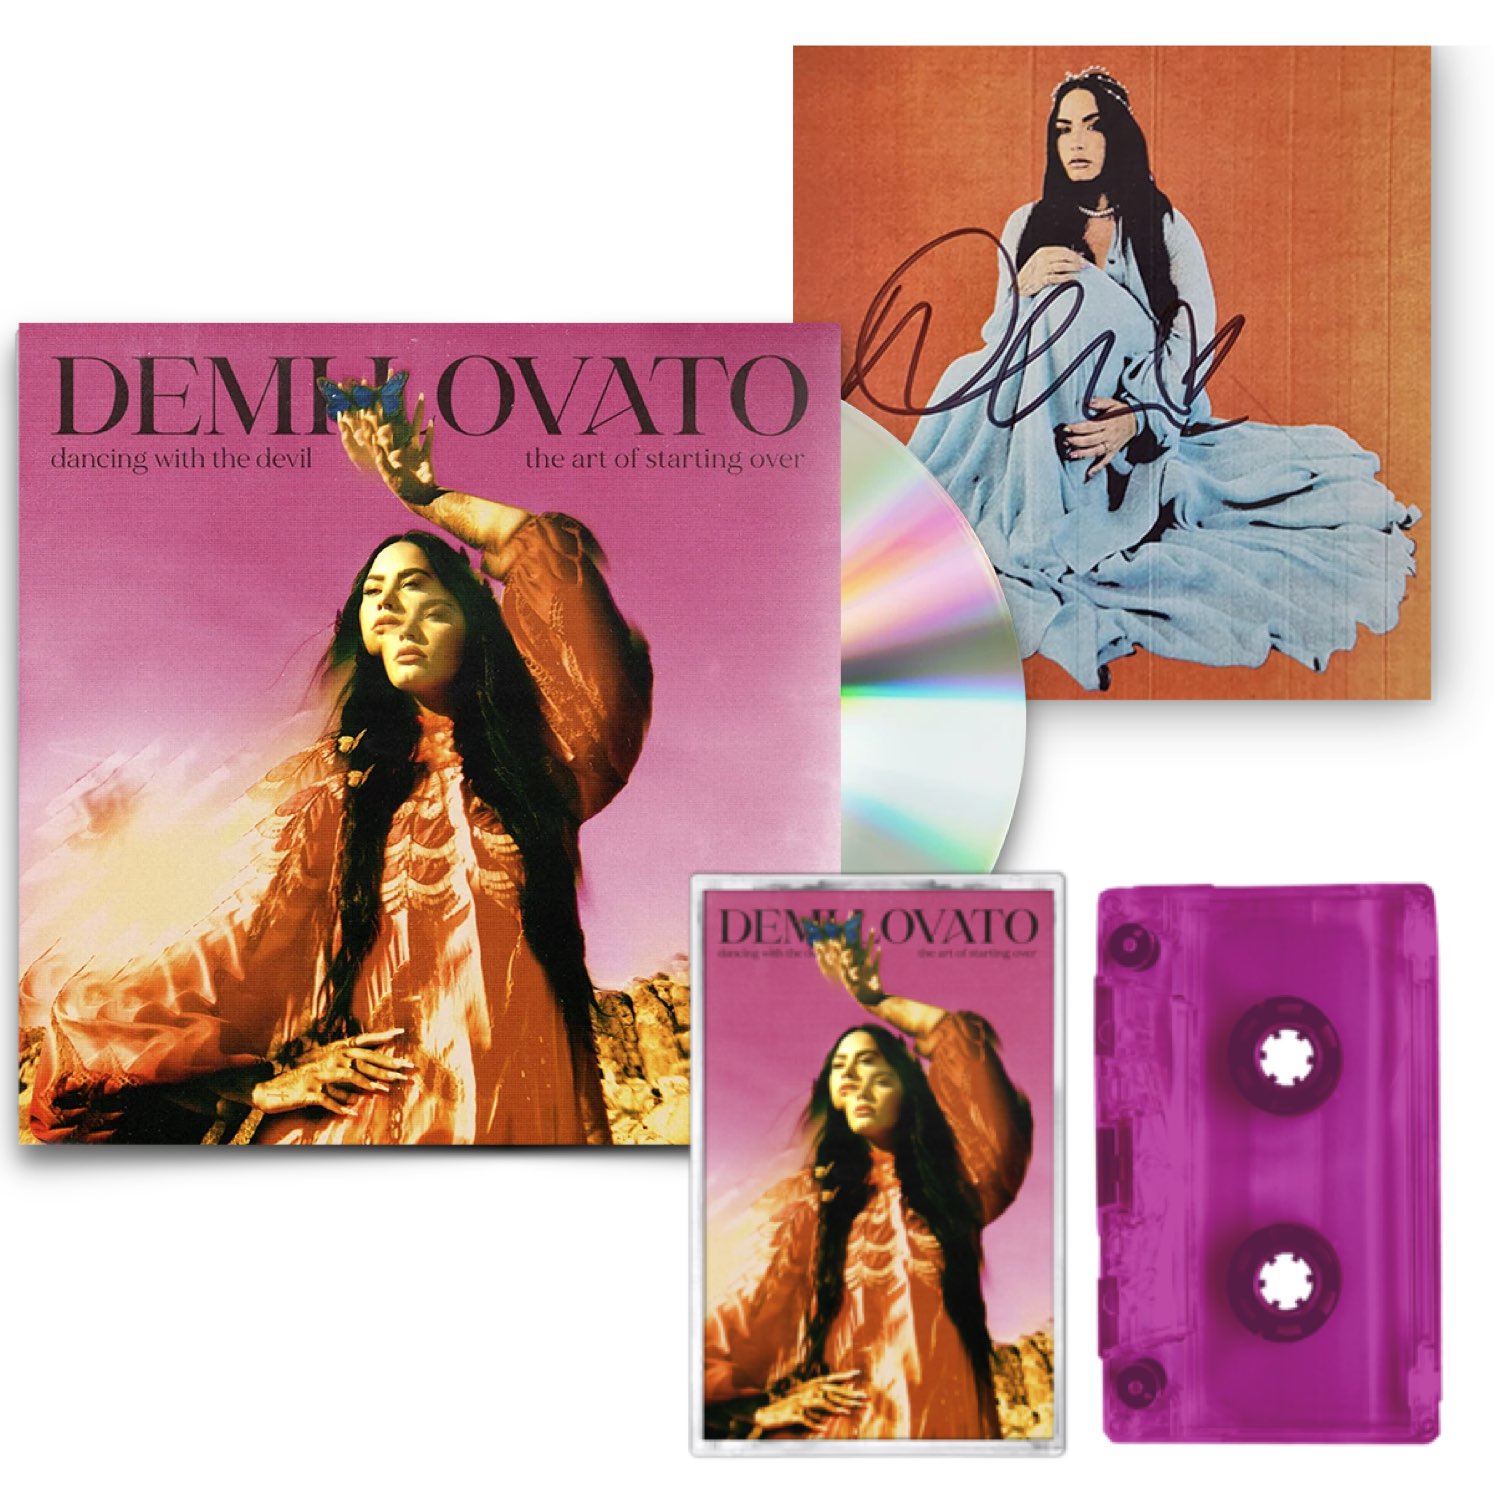 Demi Lovato - Dancing With The Devil... The Art of Starting Over [Pink CD + Pink K7 Bundle + Card Autografado]